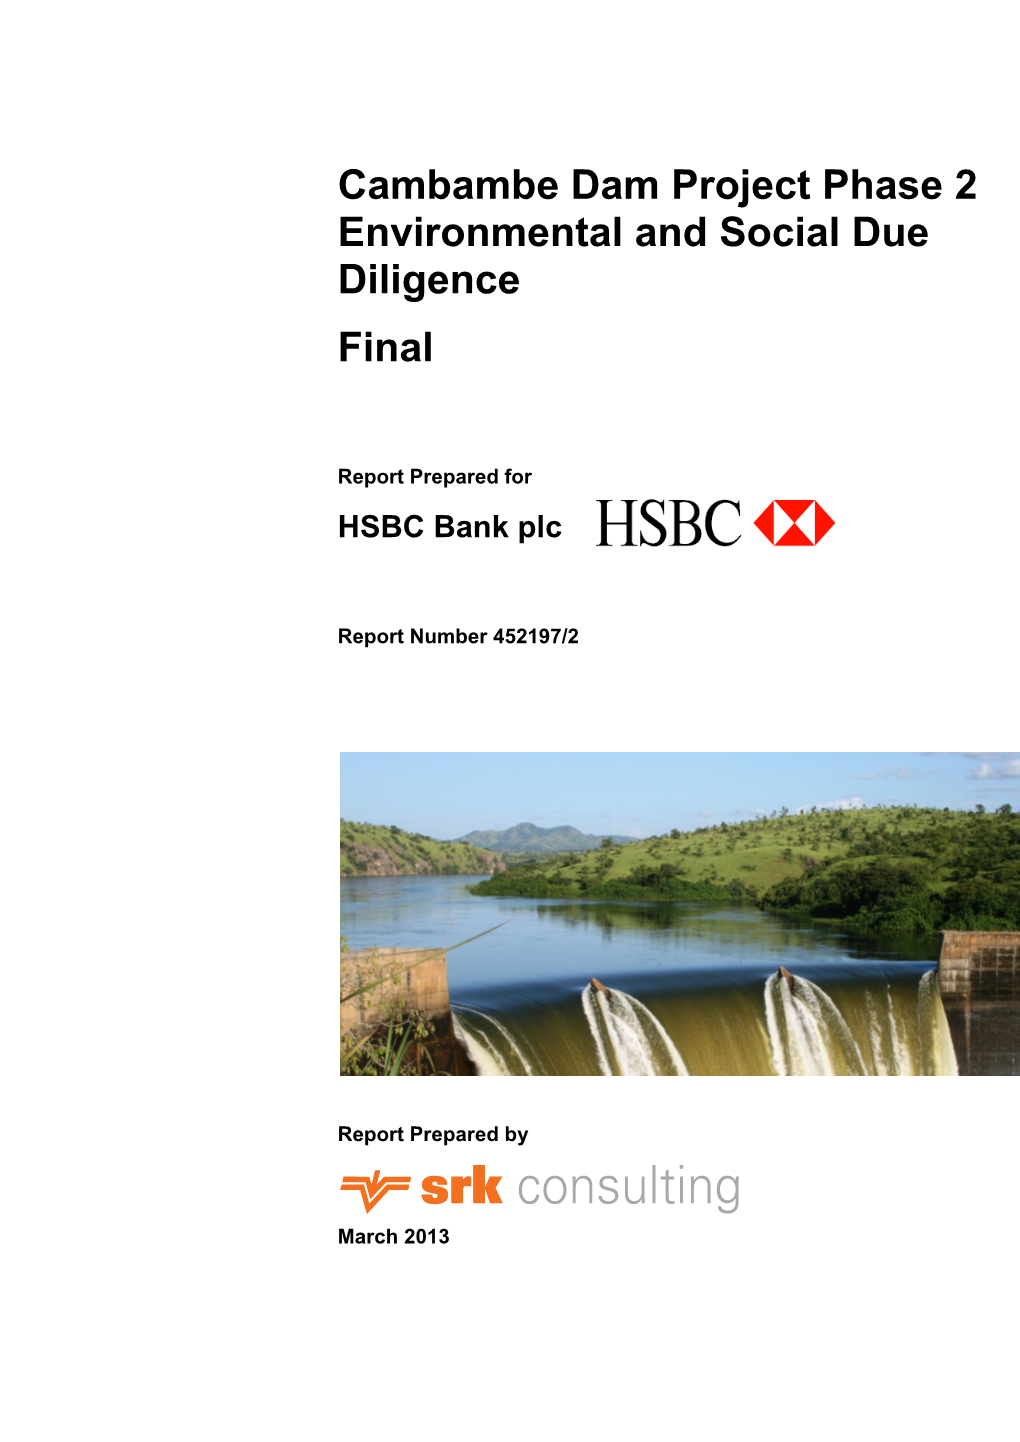 Cambambe Dam Project Phase 2 Environmental and Social Due Diligence Final